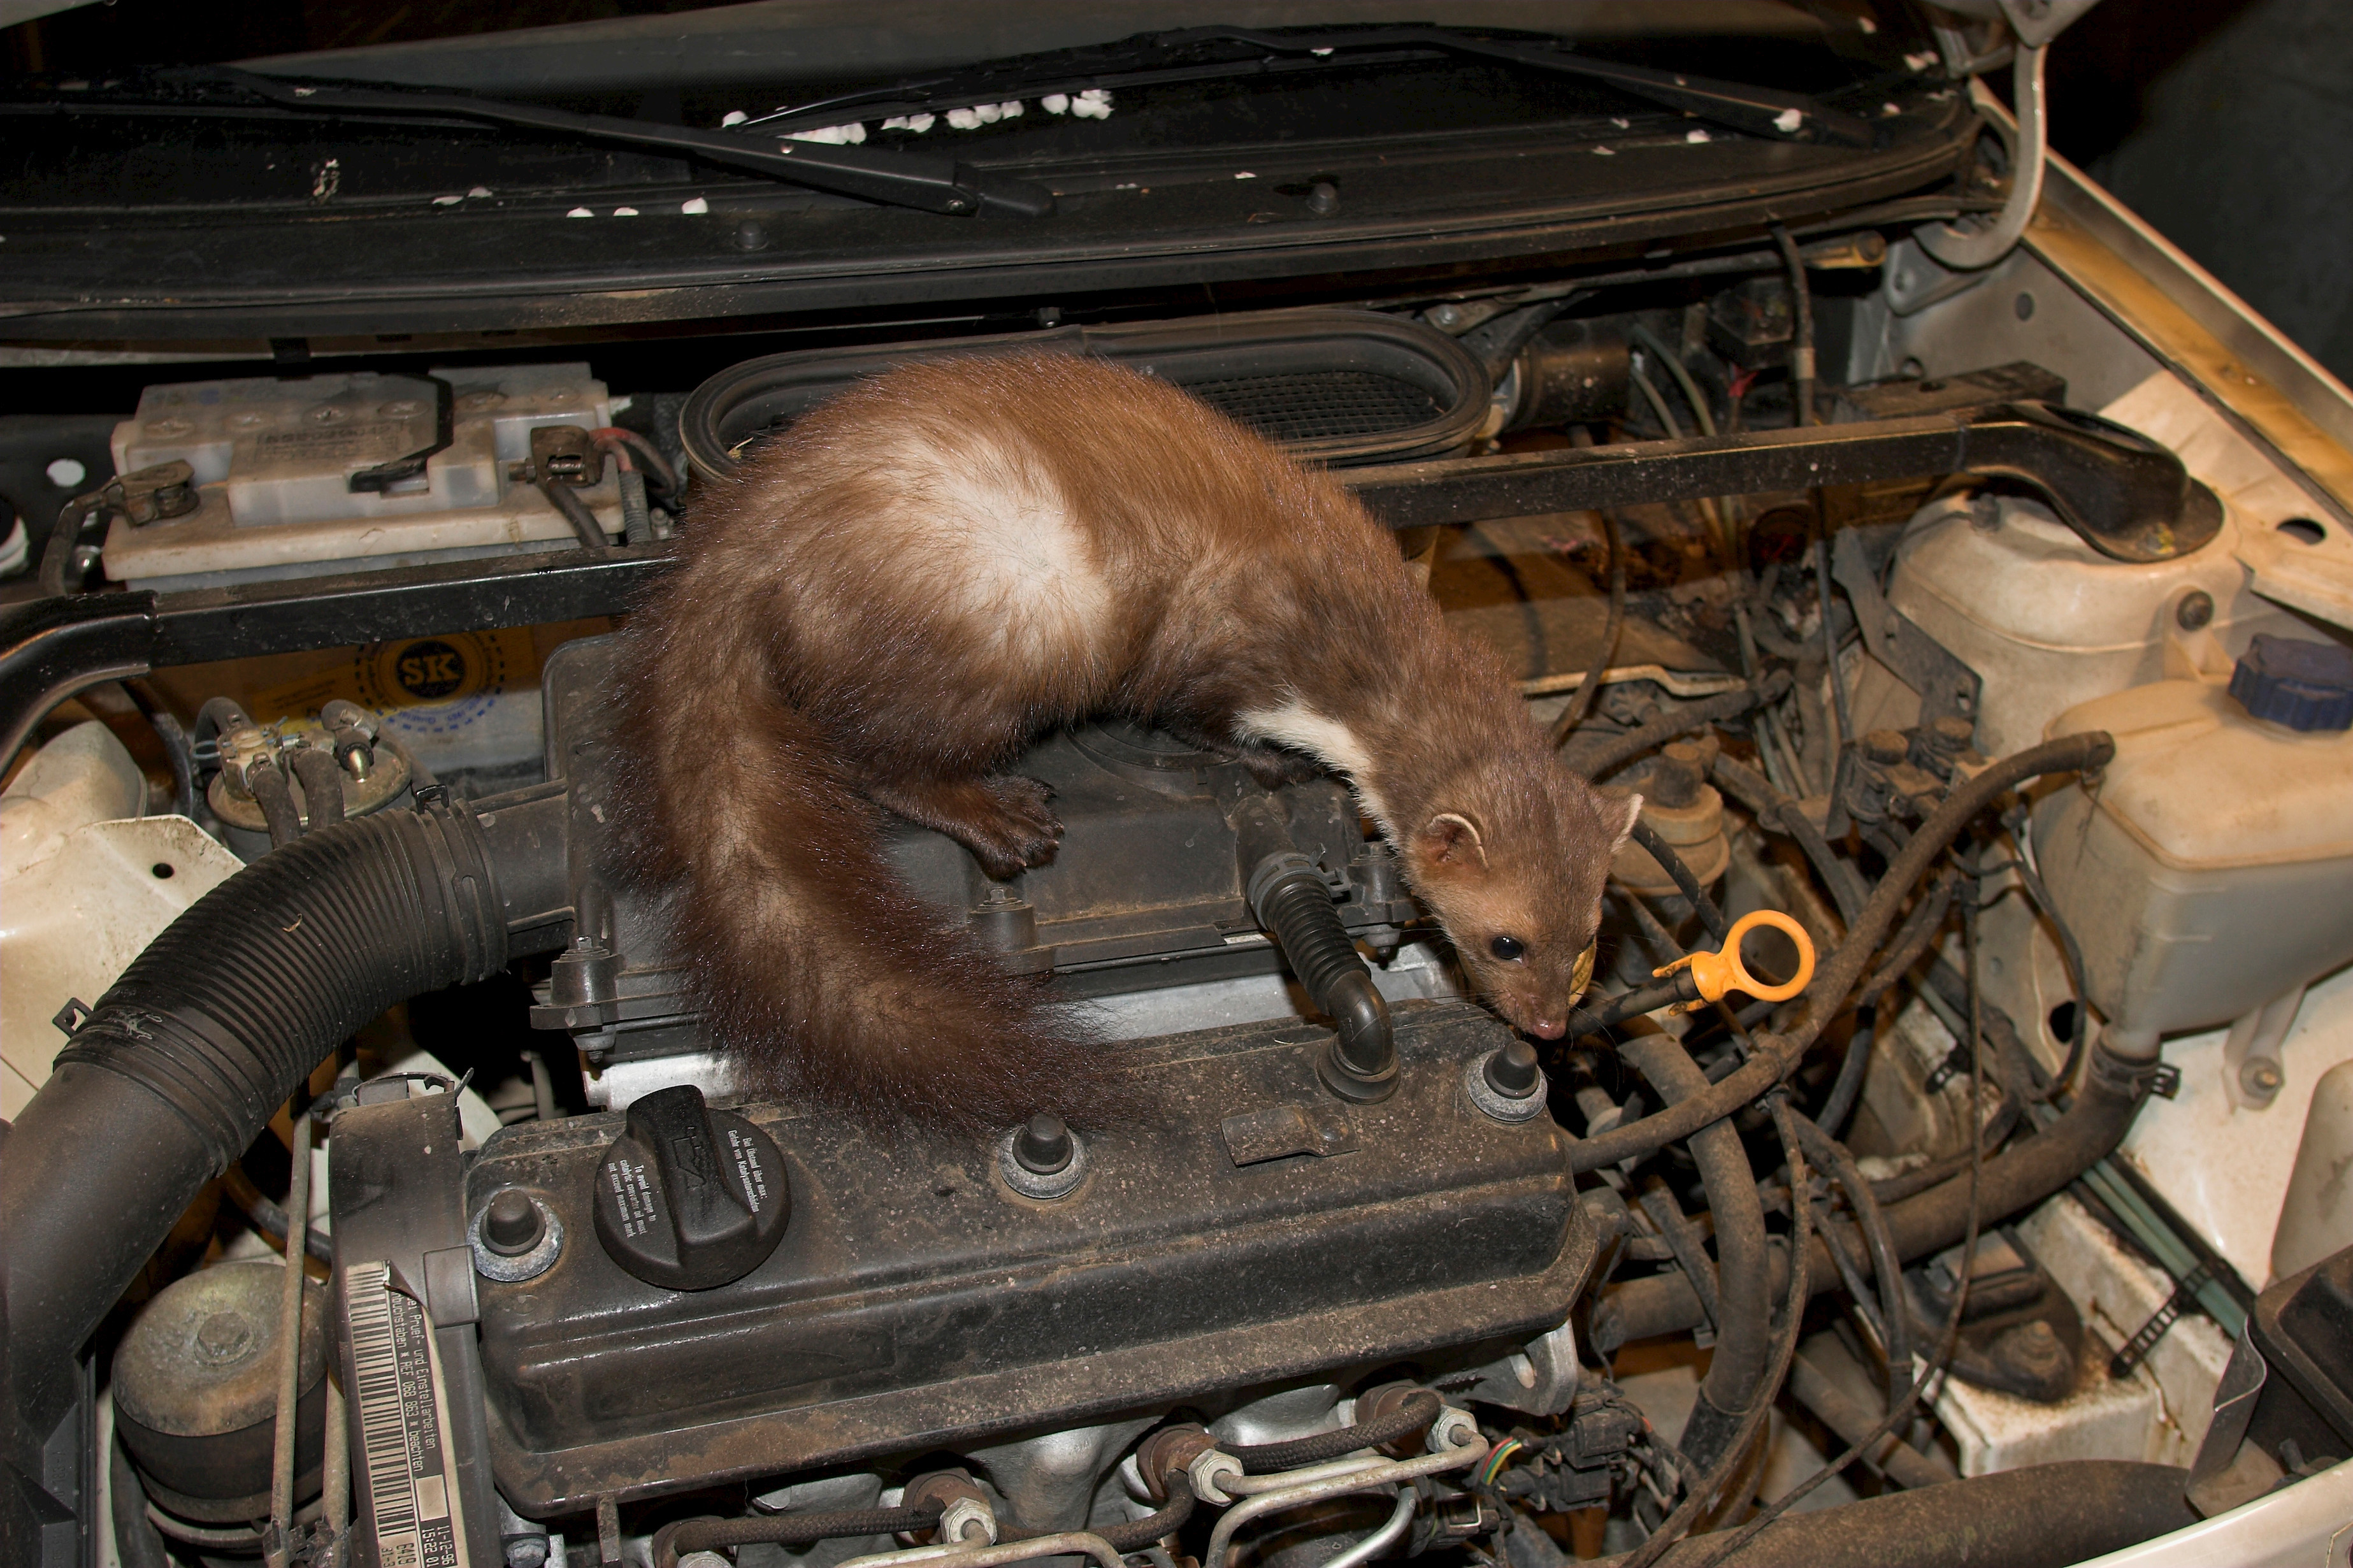 Stone martens see your car cables as a threat